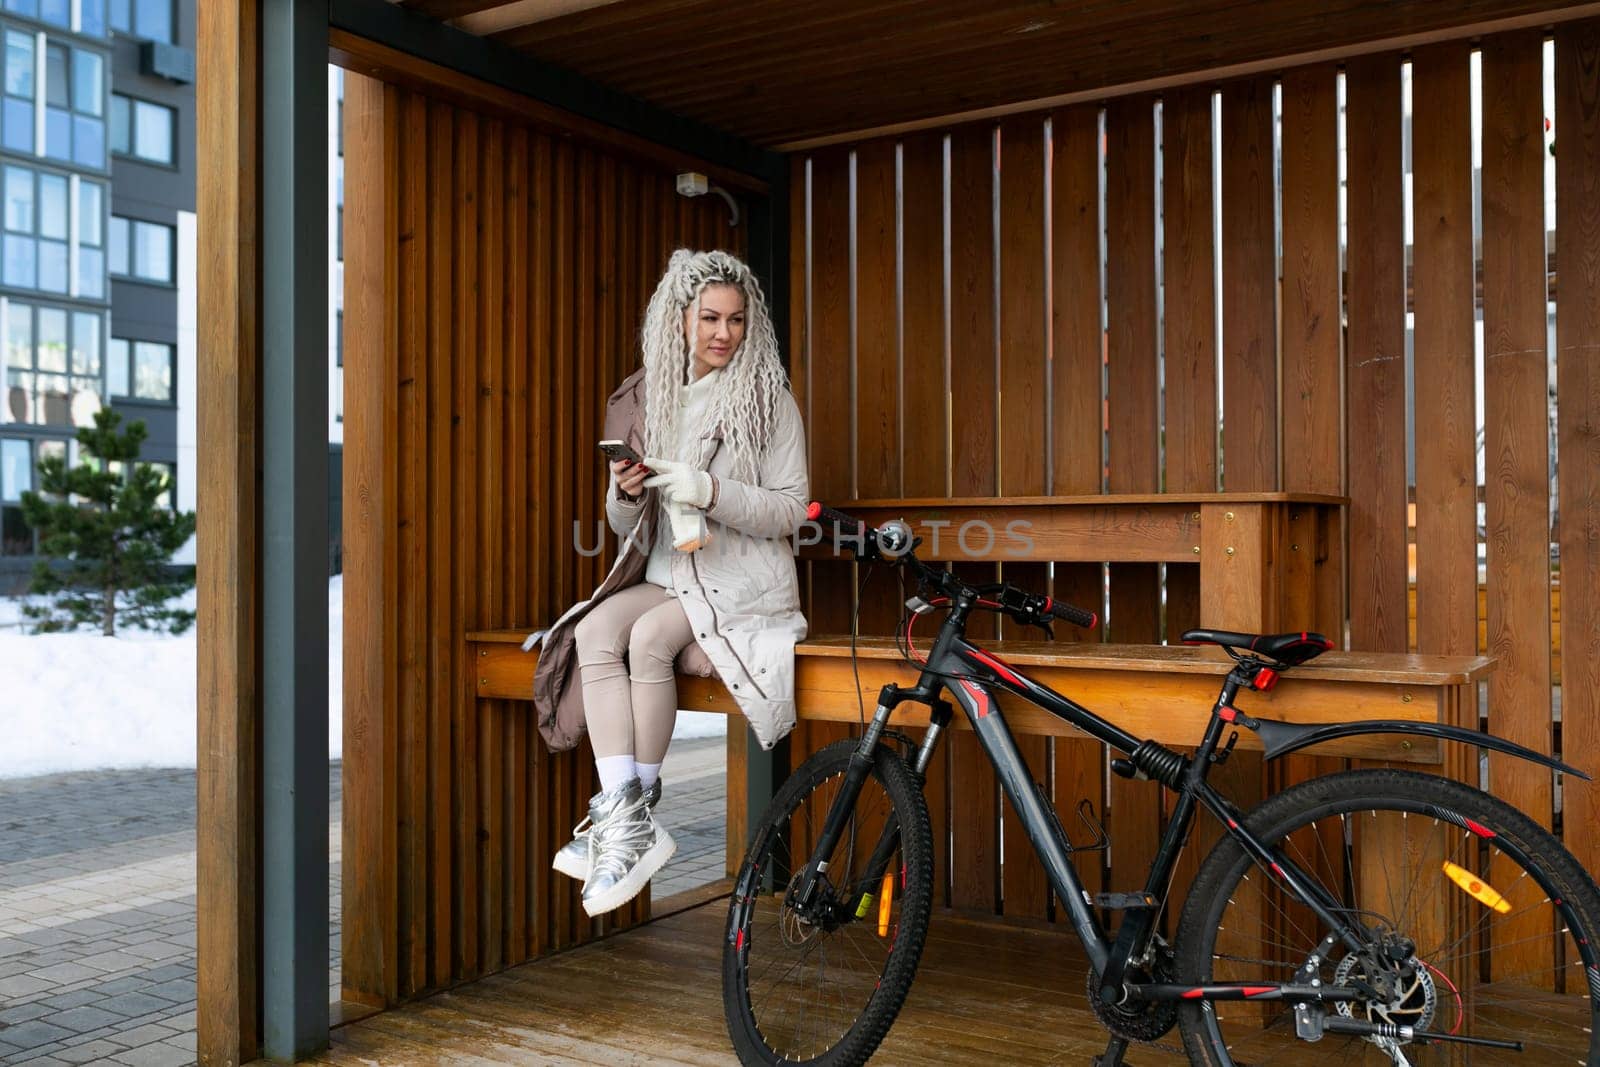 A woman in casual attire sitting on a wooden bench beside a silver bicycle. The woman is looking ahead with a relaxed posture, surrounded by a park setting with greenery in the background.